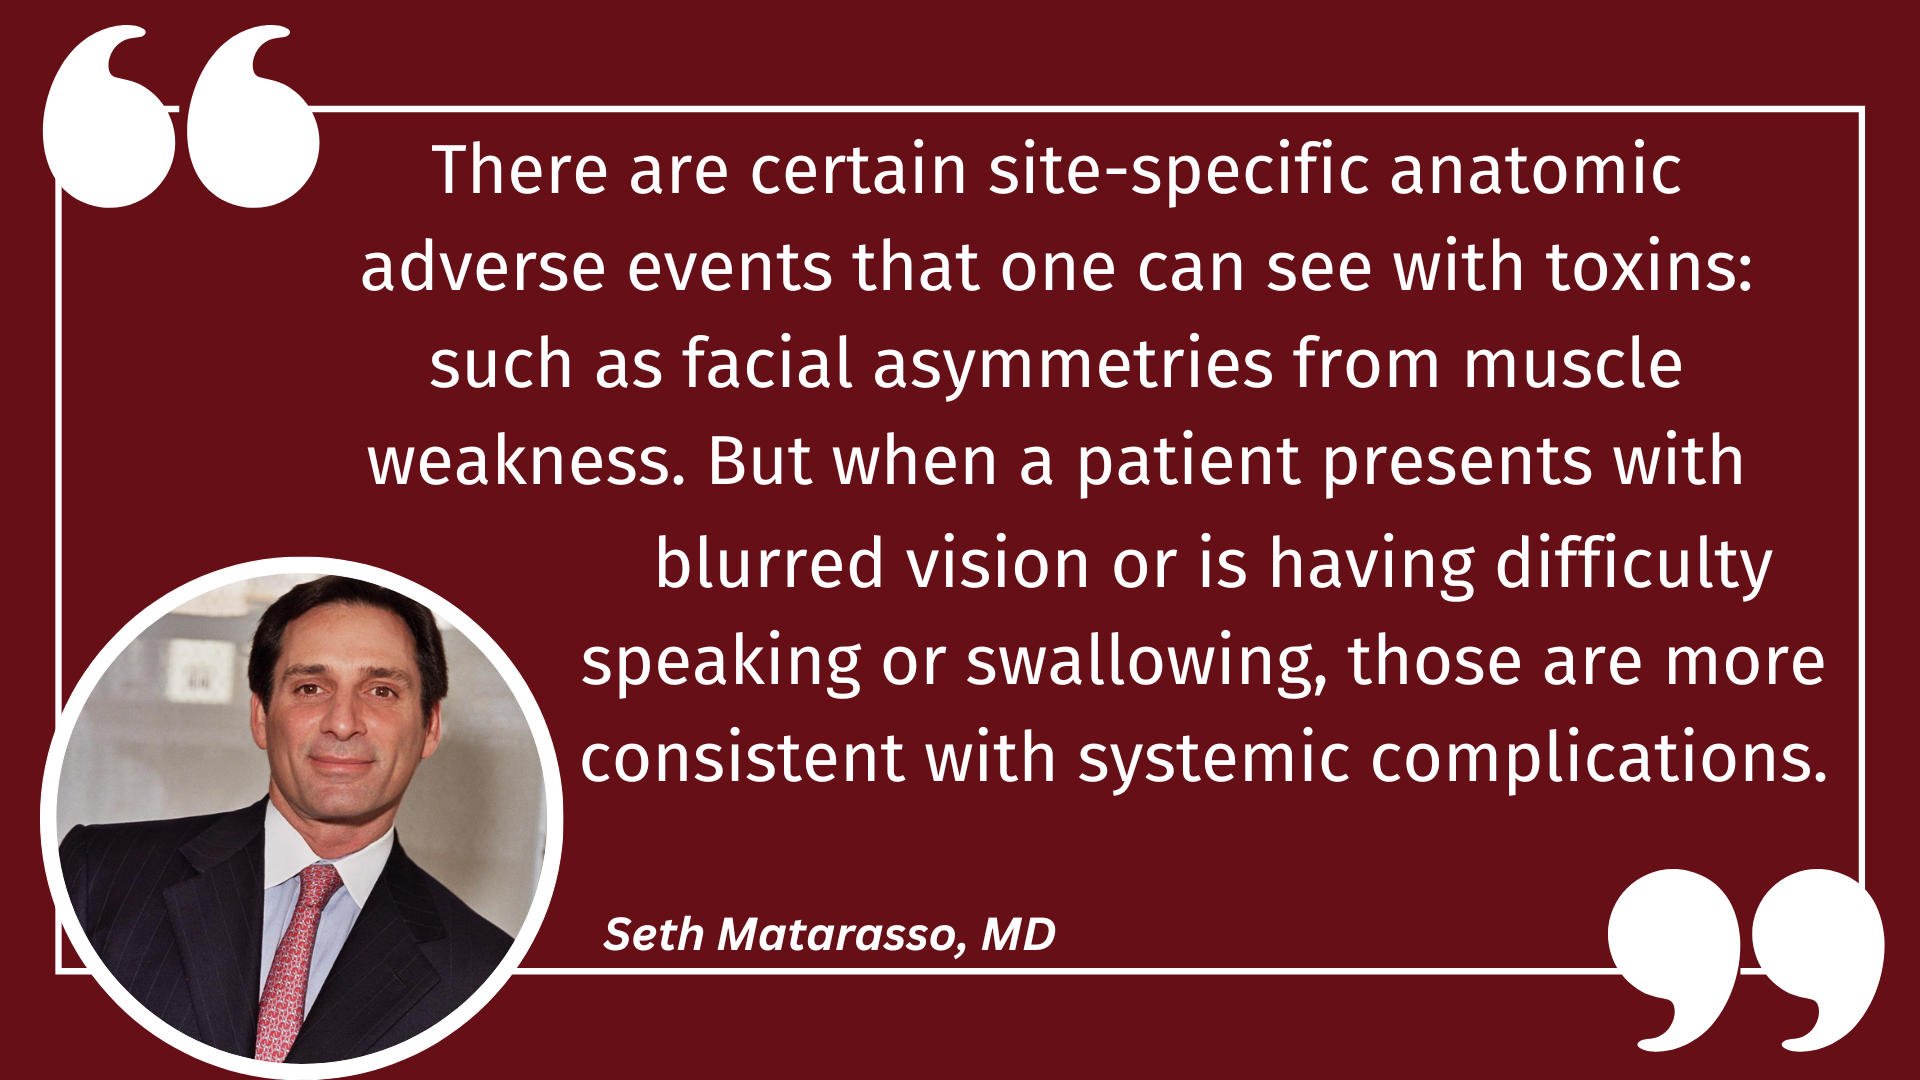 Quote: There are certain site-specific anatomic adverse events that one can see with toxins: such as facial asymmetries from muscle weakness. But, when a patient presents with blurred vision or is having difficulty speaking or swallowing, those are more consistent with systemic complications